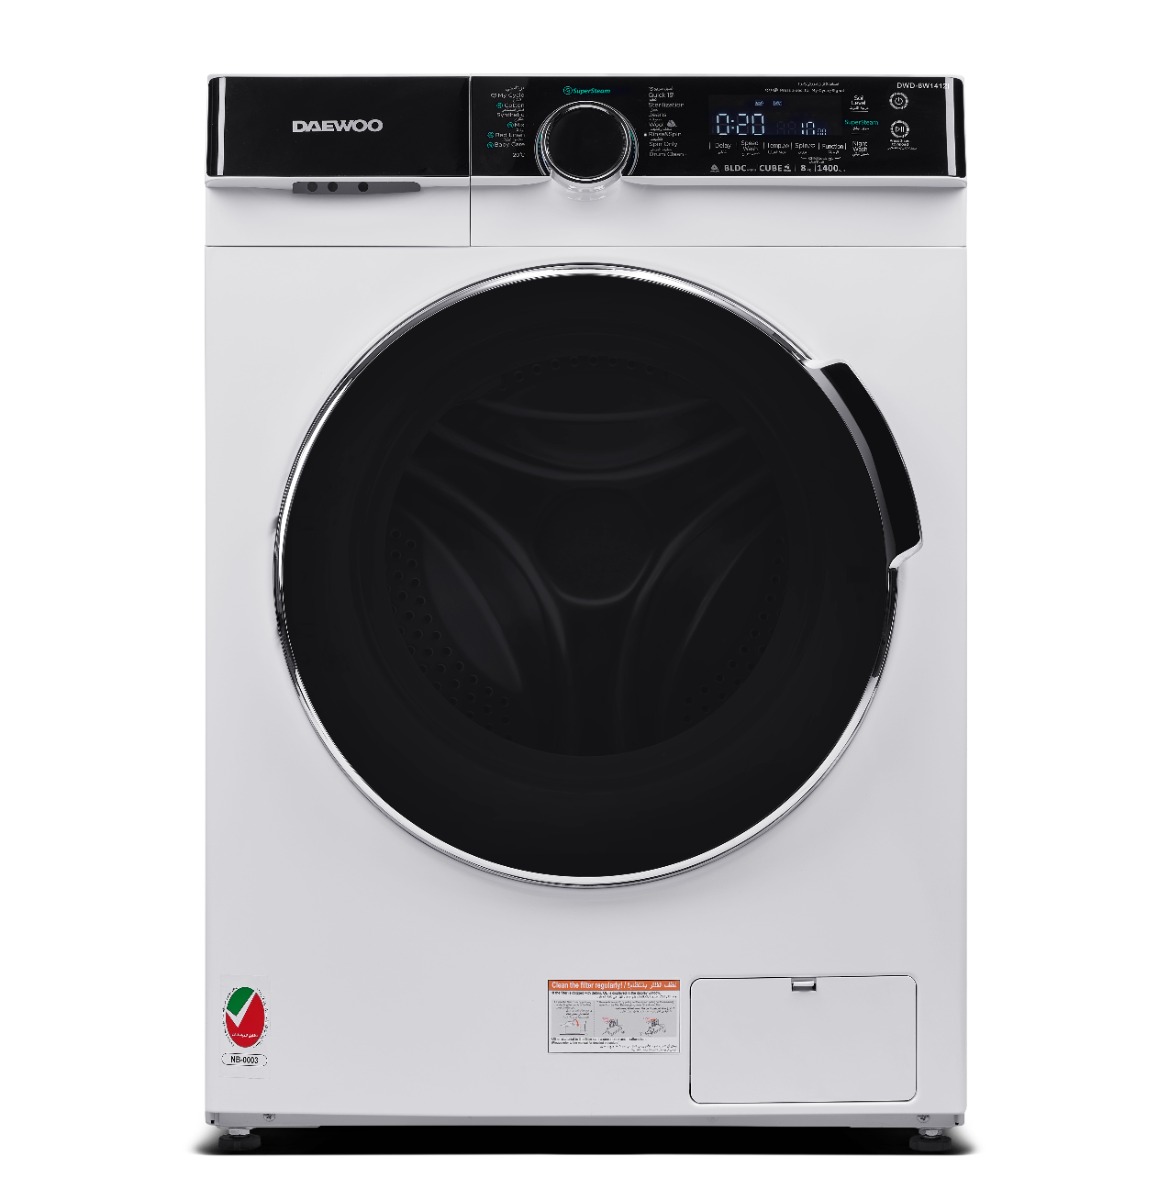 Picture of Daewoo - 8 Kg Washer, 1400 RPM, Front Load Washer - Inverter Motor - White - DWD-8W1412I - 1 Year Warranty.